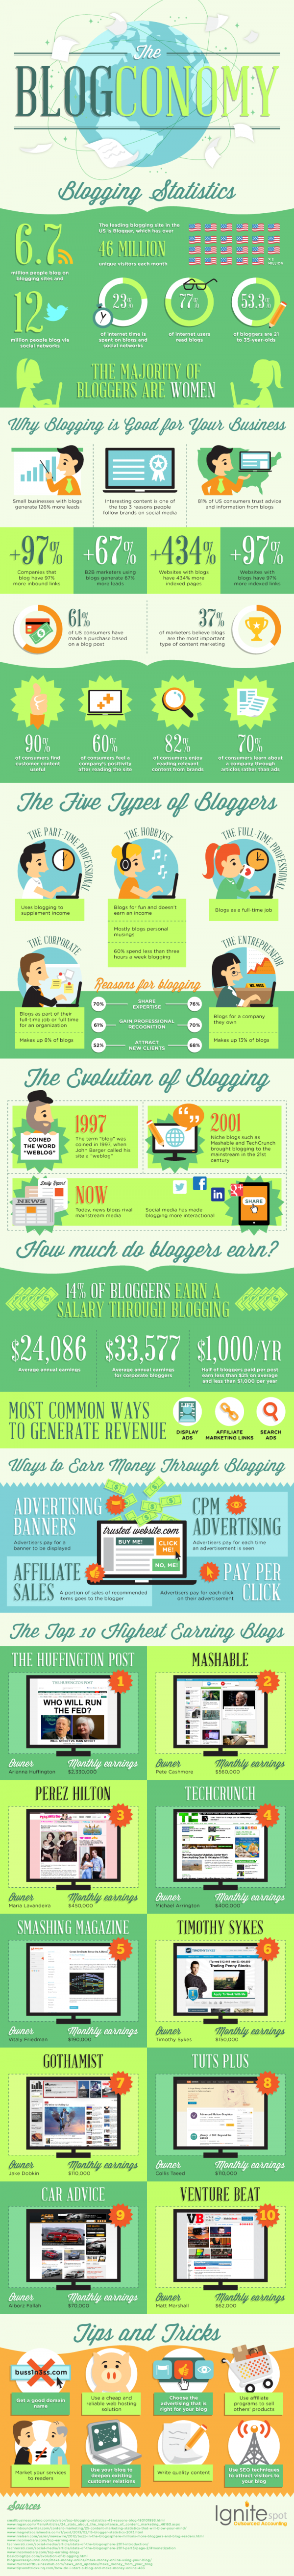 facts on blogs_blog economy